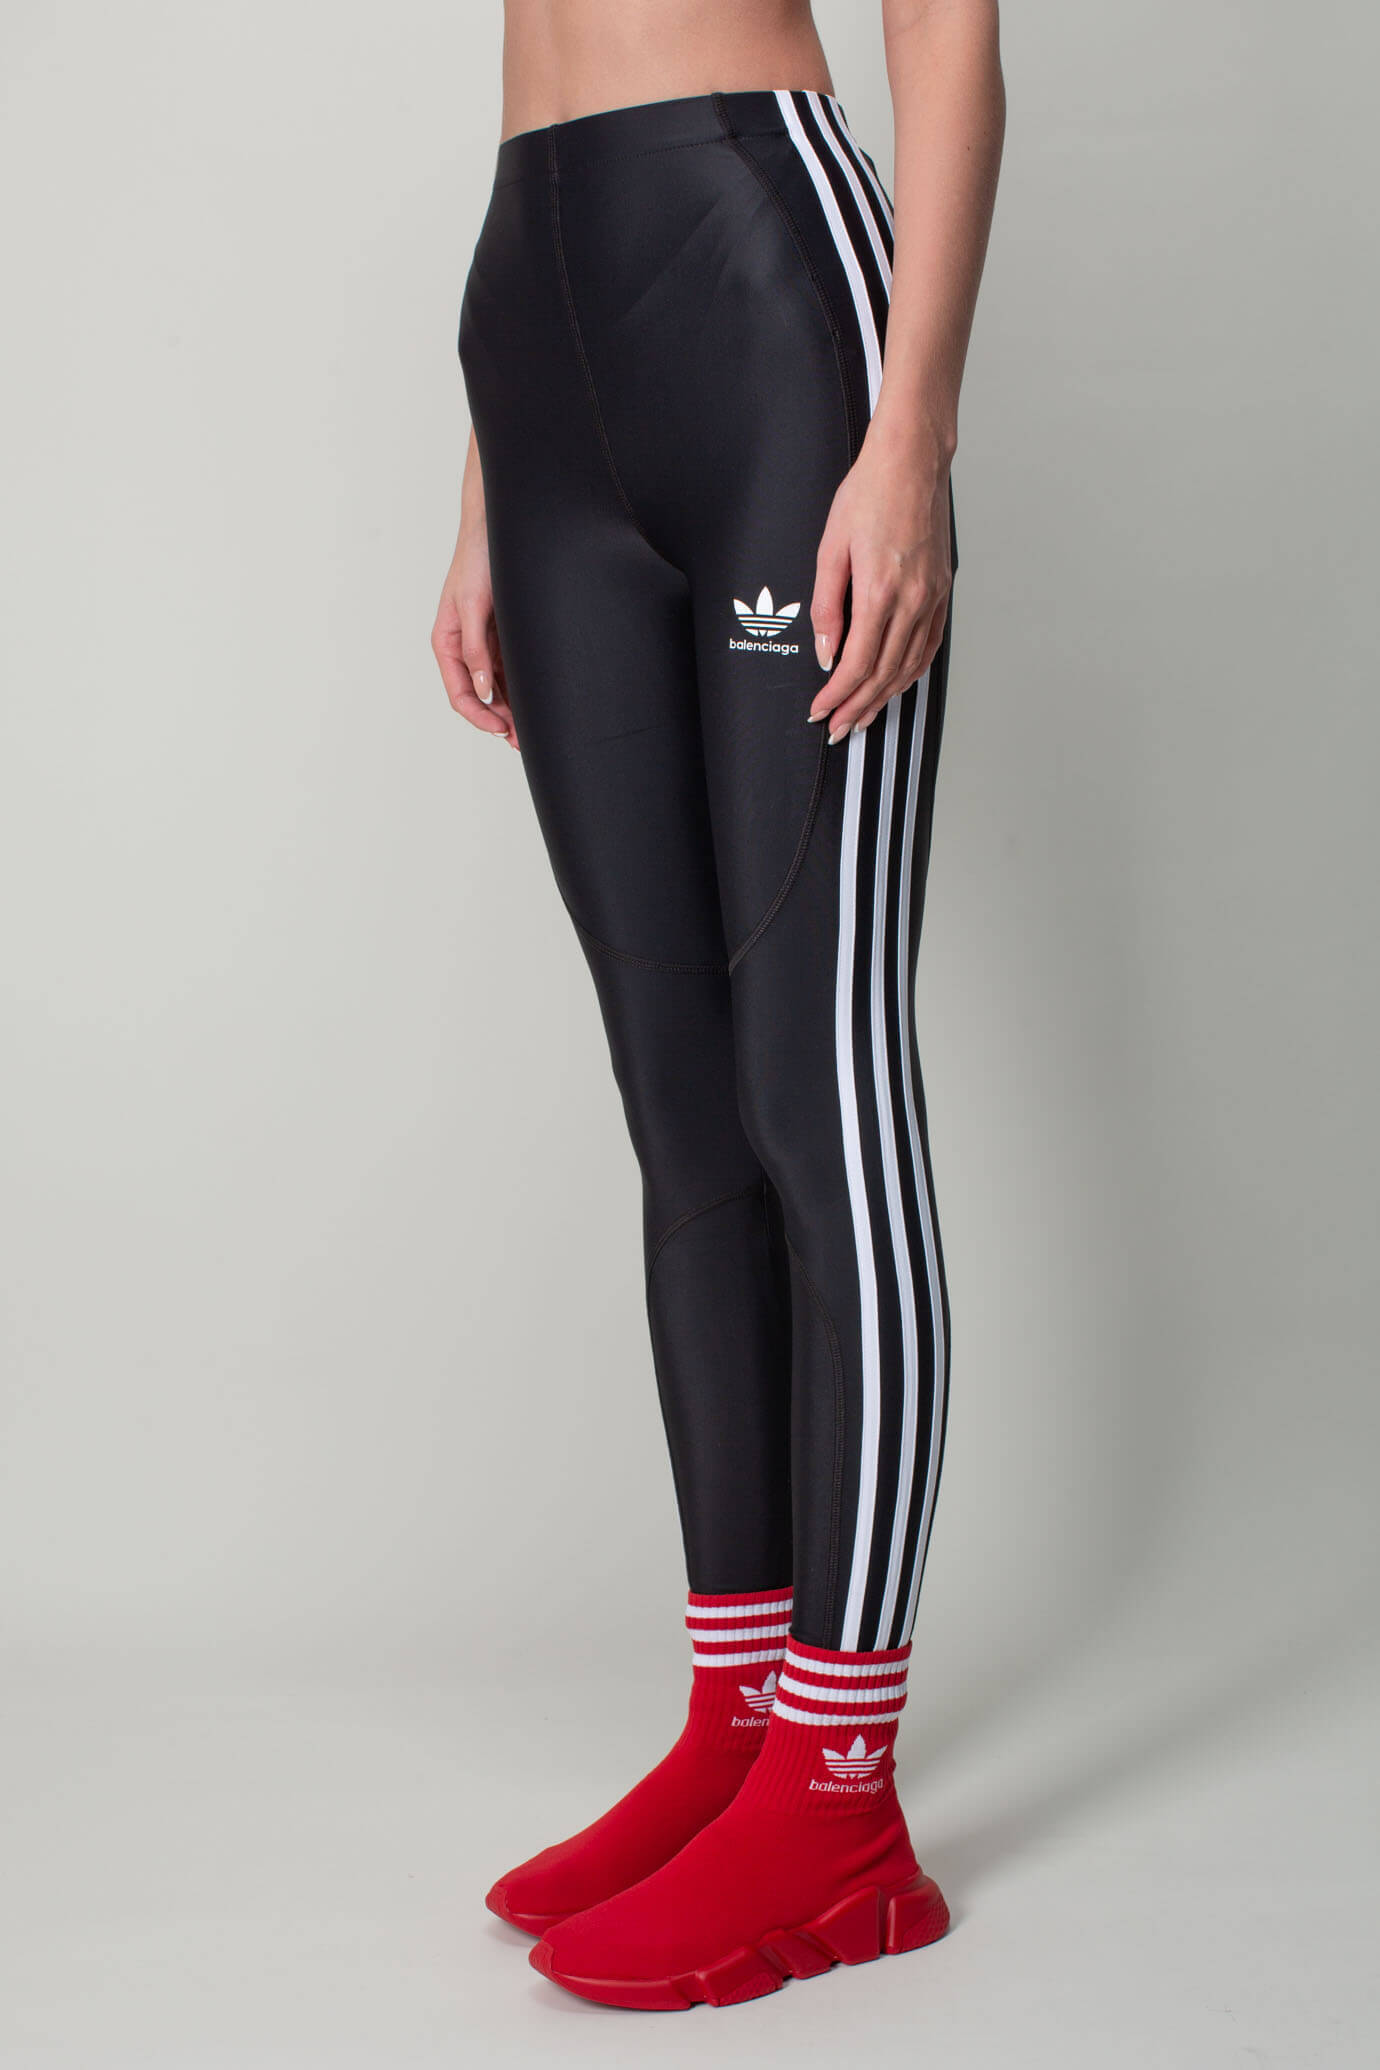 Buy ADIDAS Red Tf Base 7/8 Printed Polyester Women's Active Wear Tights |  Shoppers Stop